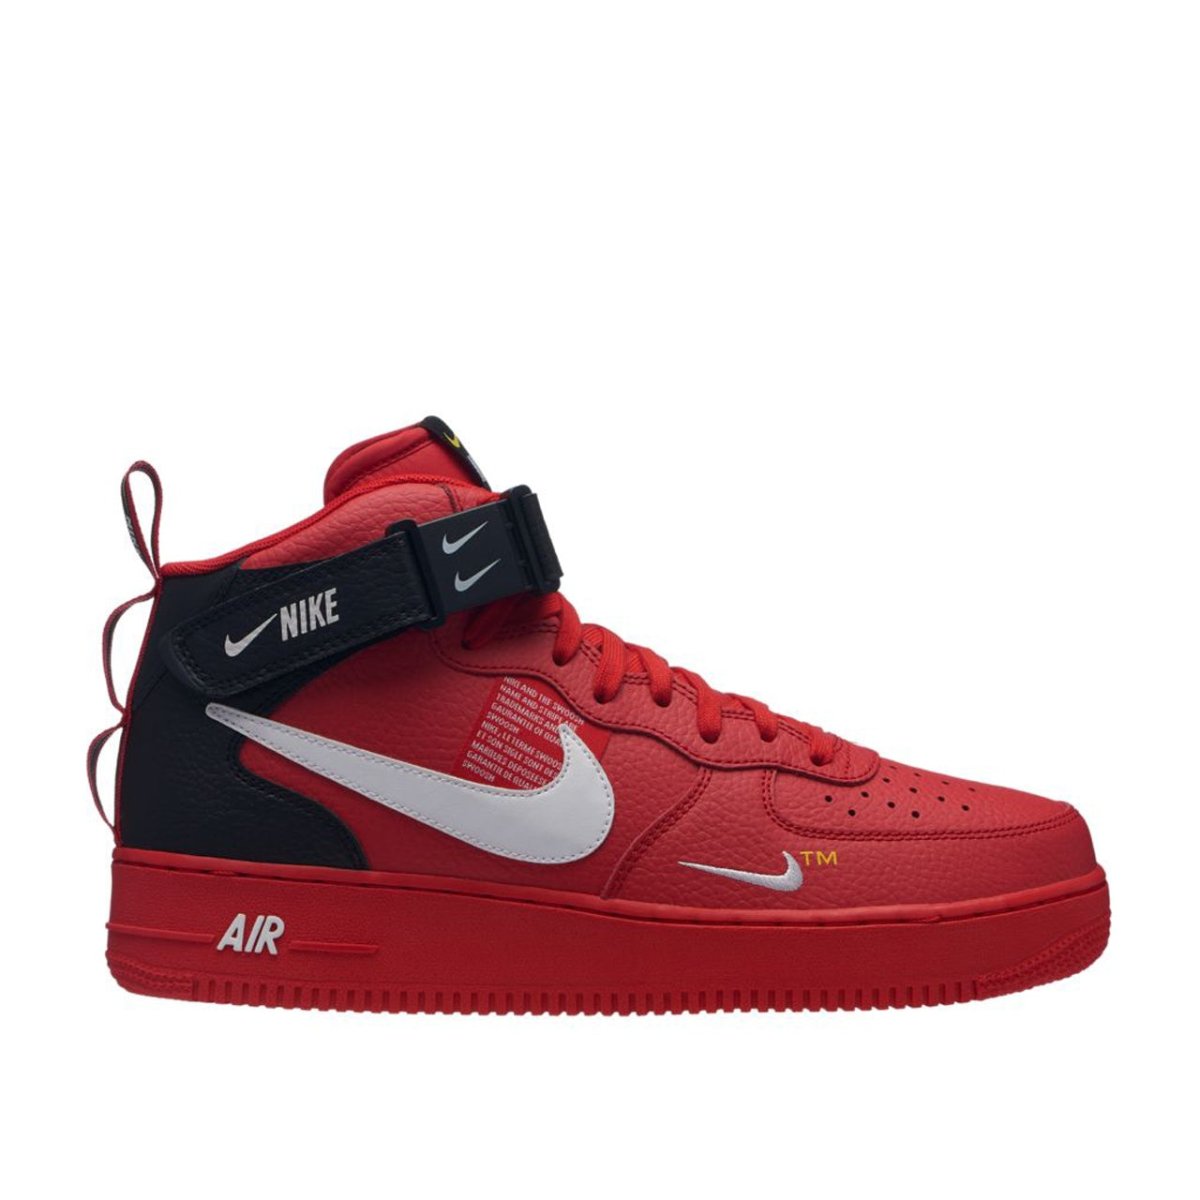 Nike Air Force 1 Mid '07 LV8 (Rot)  - Allike Store